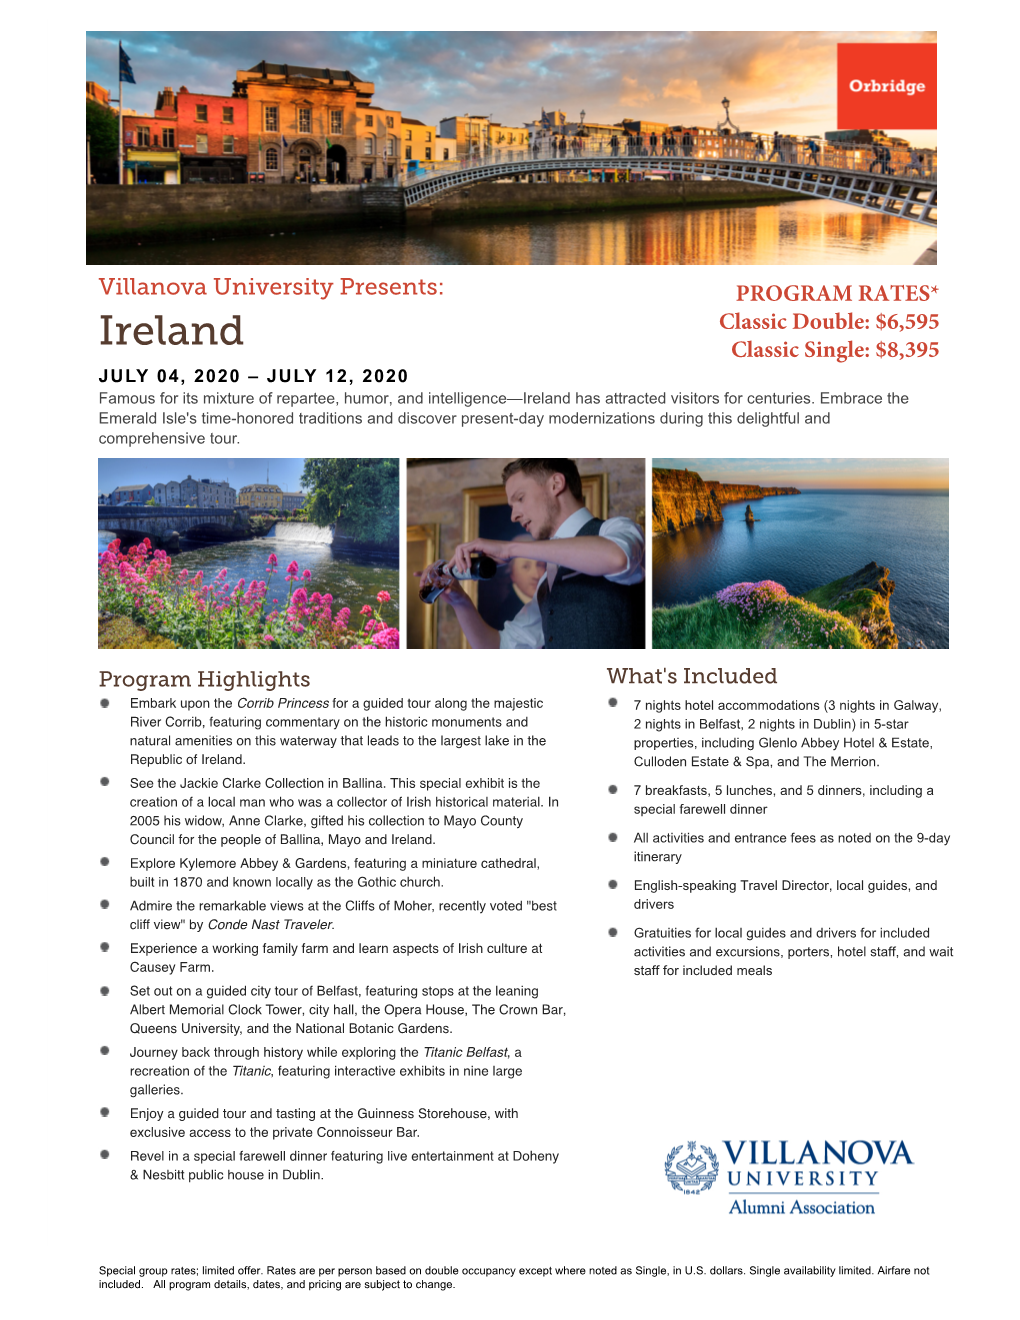 Ireland Classic Single: $8,395 JULY 04, 2020 – JULY 12, 2020 Famous for Its Mixture of Repartee, Humor, and Intelligence—Ireland Has Attracted Visitors for Centuries